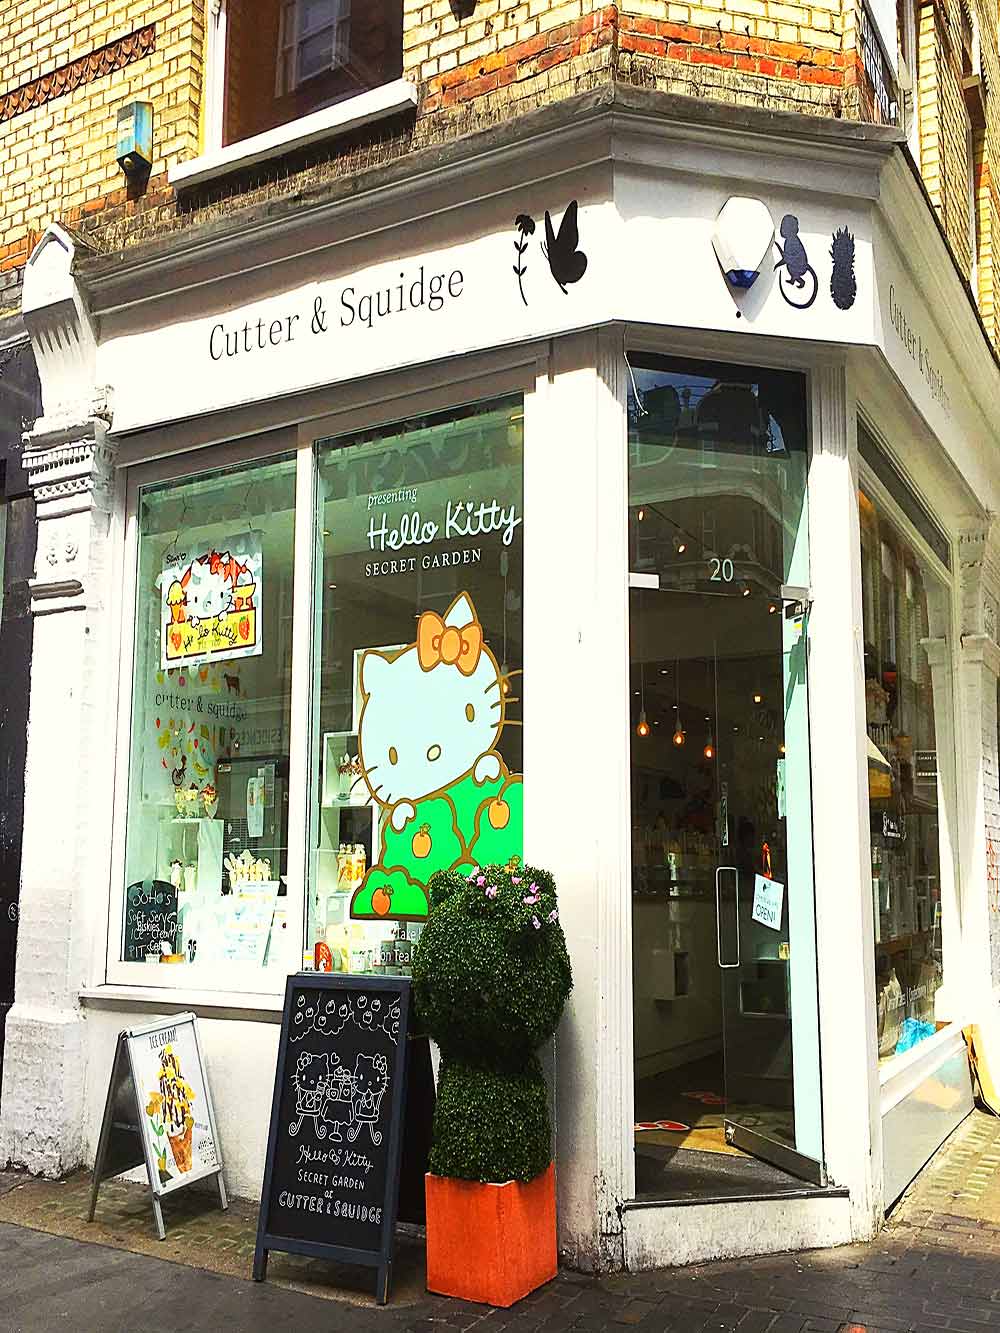 Hello Kitty’s Secret Garden – WhodoIdo: Hello Kitty afternoon tea pop up at Cutter & Squidge located in the heart of London.  If you're a big fan of Hello Kitty then you'd love it here! From the big illuminated Hello Kitty to the detailed Hello Kitty plastered all over the walls